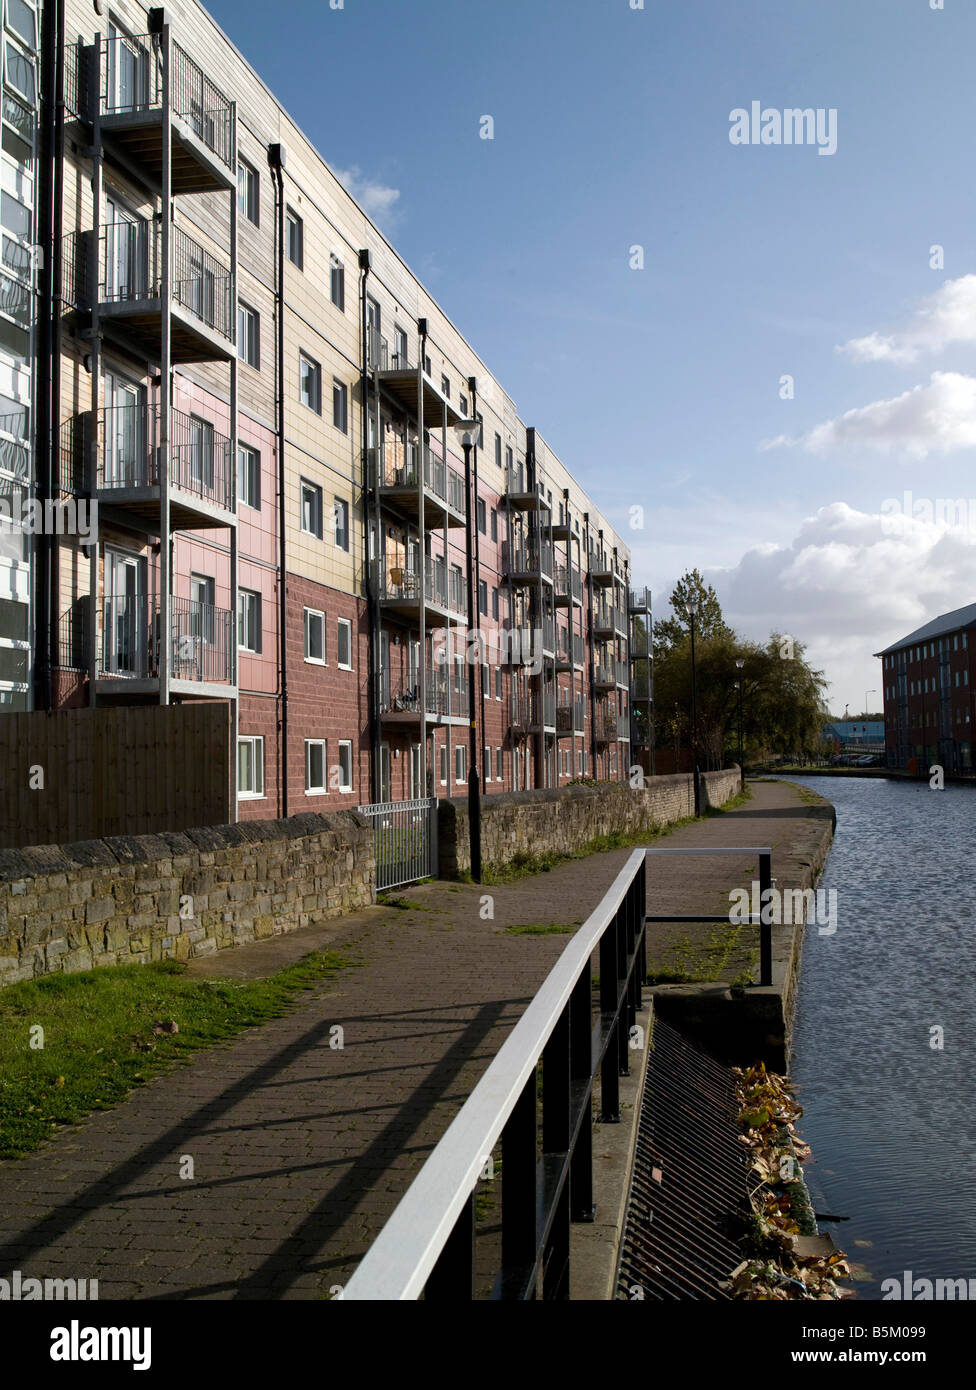 Canalside residential apartments, next to the Leeds Liverpool Canal, Wigan Pier, Wigan, Lancashire, Northern England Stock Photo